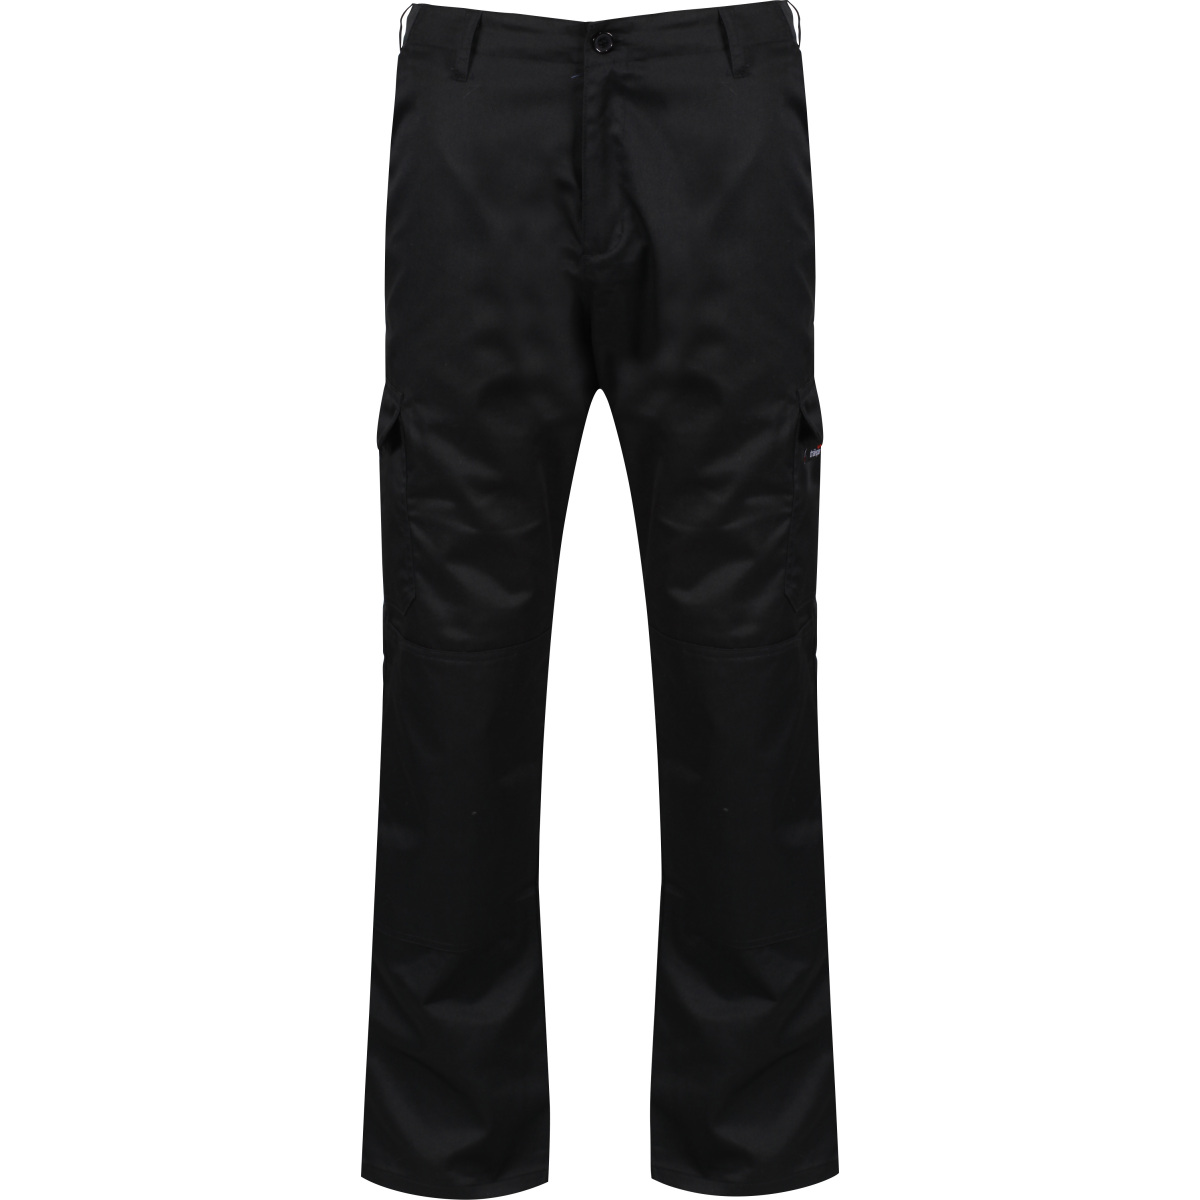 TRCK88 CARGO TROUSER WITH KNEEPAD POCKET - AAA Safety Supplies Limited